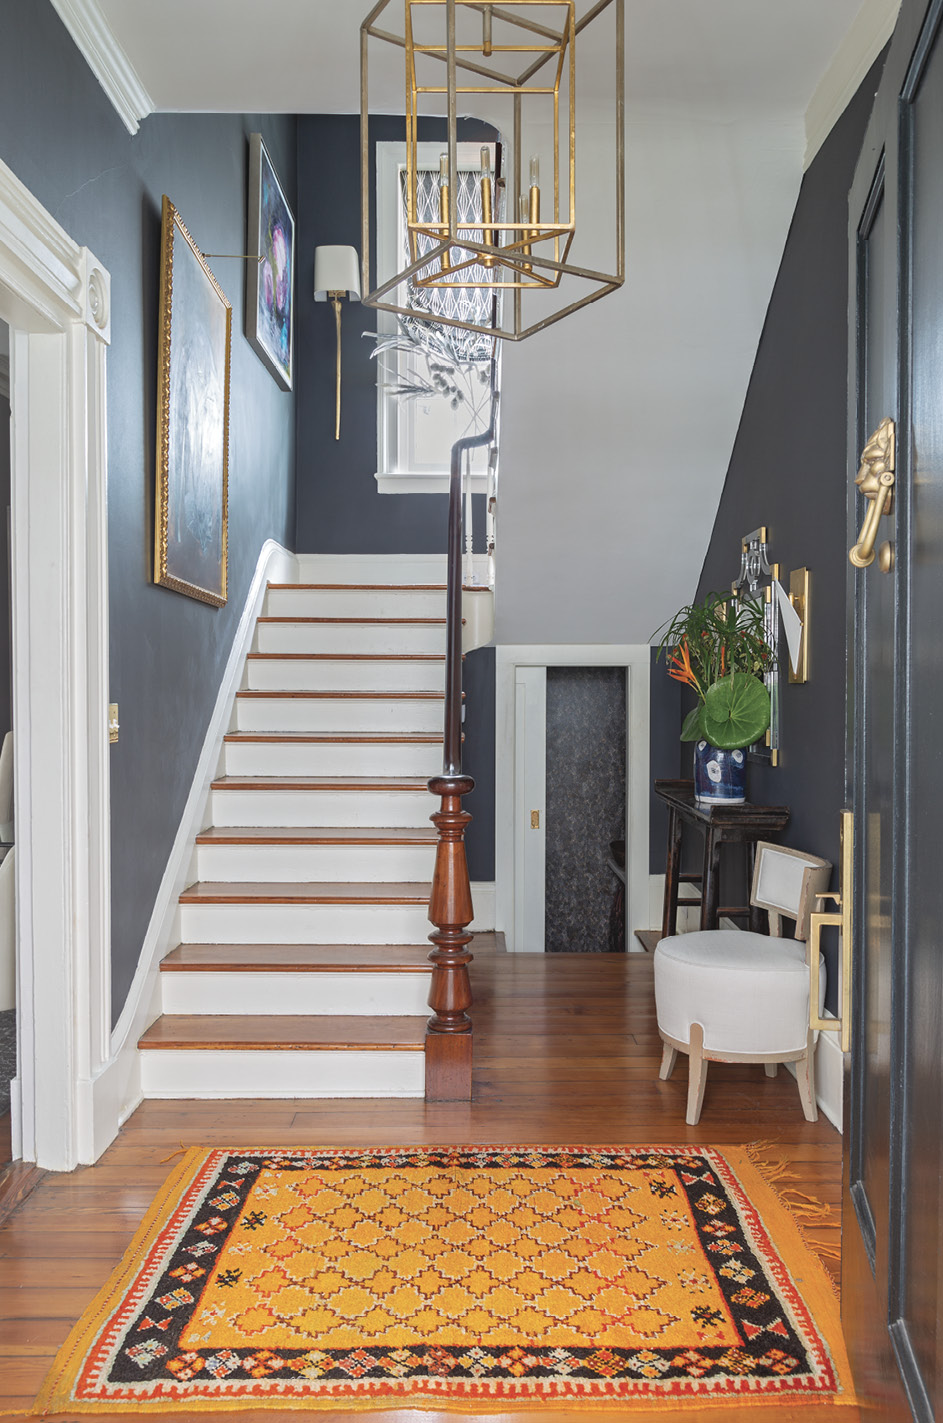 High Contrast: The entry and stairwell are painted in Benjamin Moore’s striking “Wrought Iron.” Offset by white trim and the wooden treads and handrail, the color adds personality to a utilitarian space and helps the gold accents (wall sconces and chandeliers from Circa Lighting) pop.